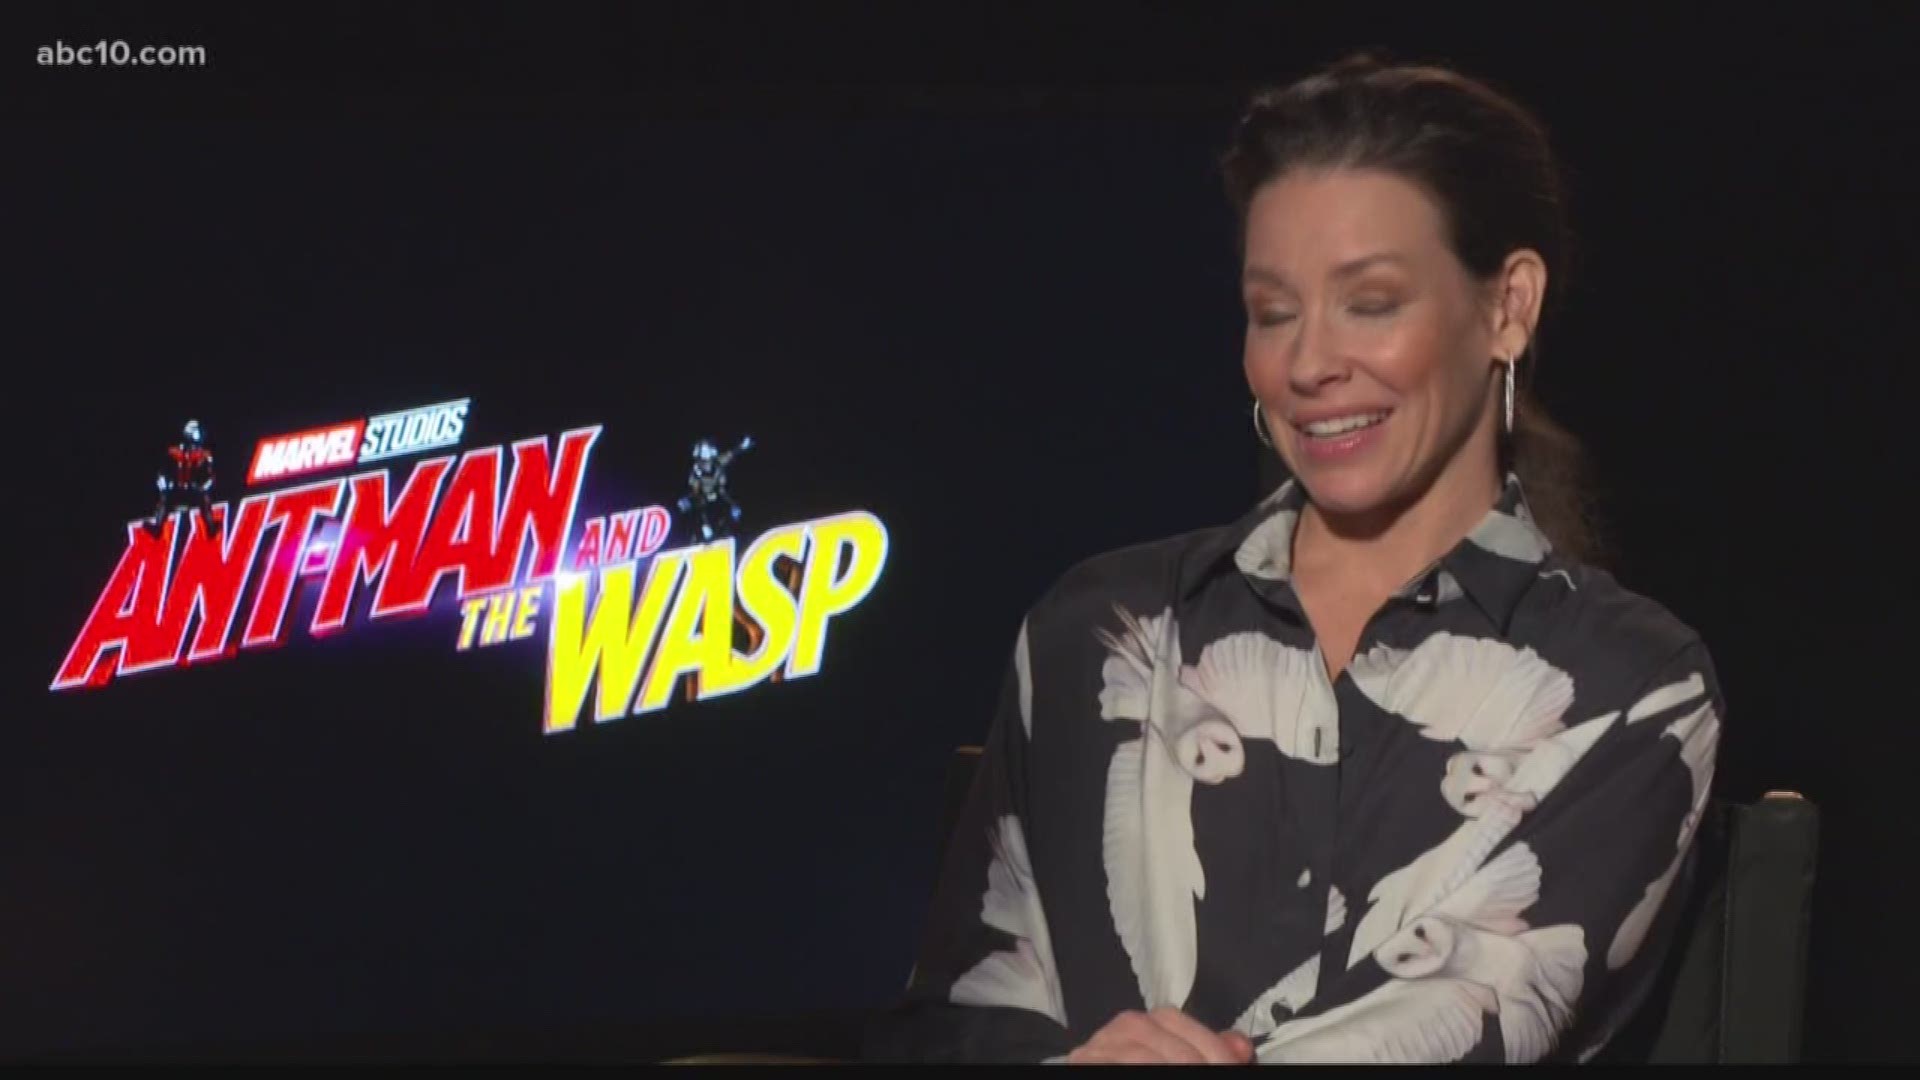 Mark S. Allen sits down with Evangeline Lilly to talk about Marvel's latest.